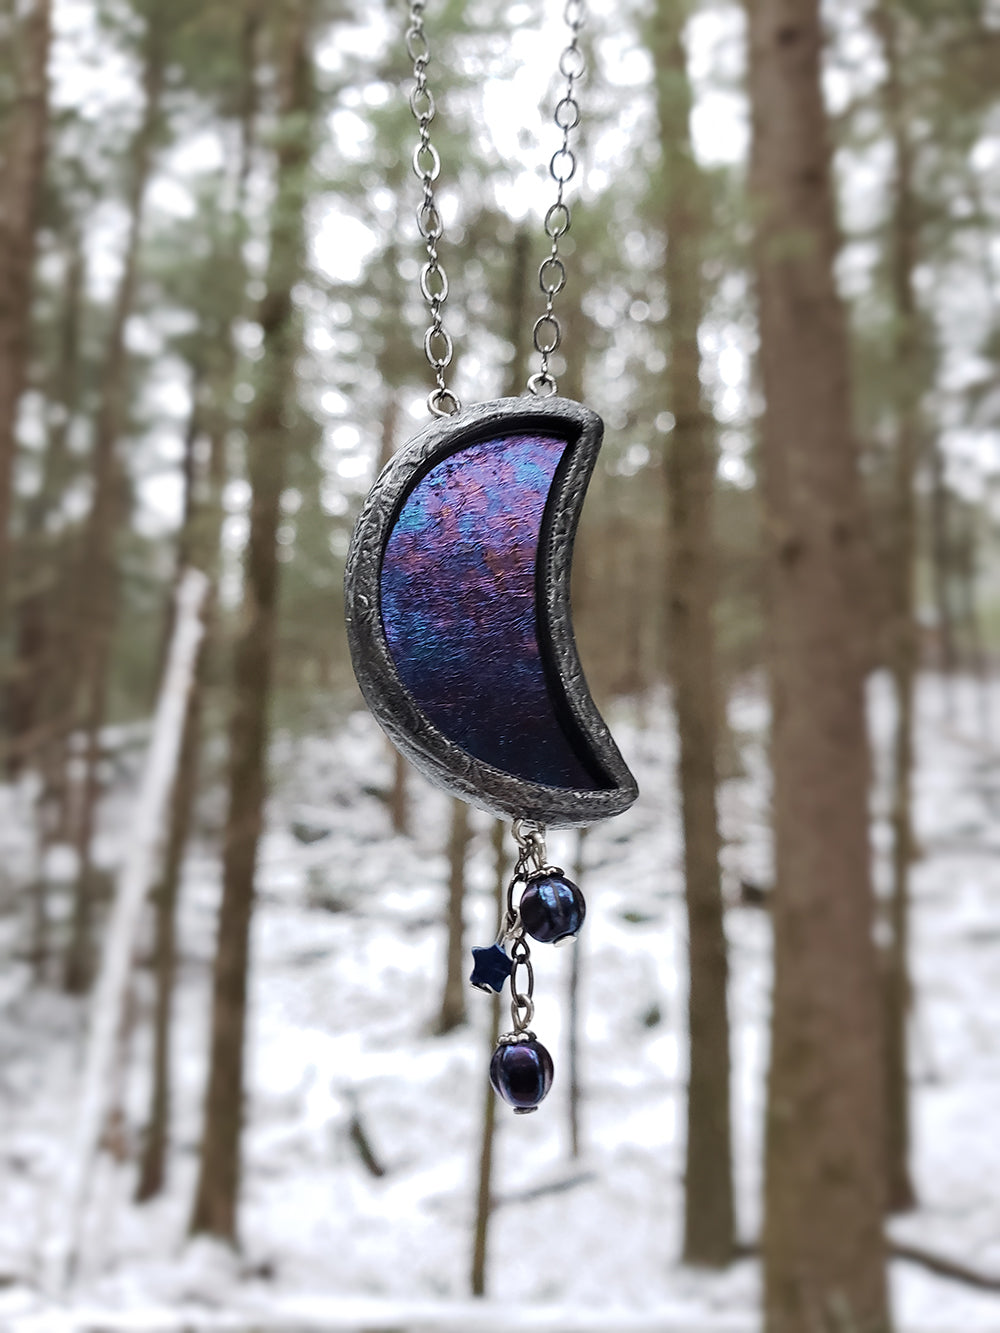 lux dubia luna ~ Iridescent Stained Glass Amulet